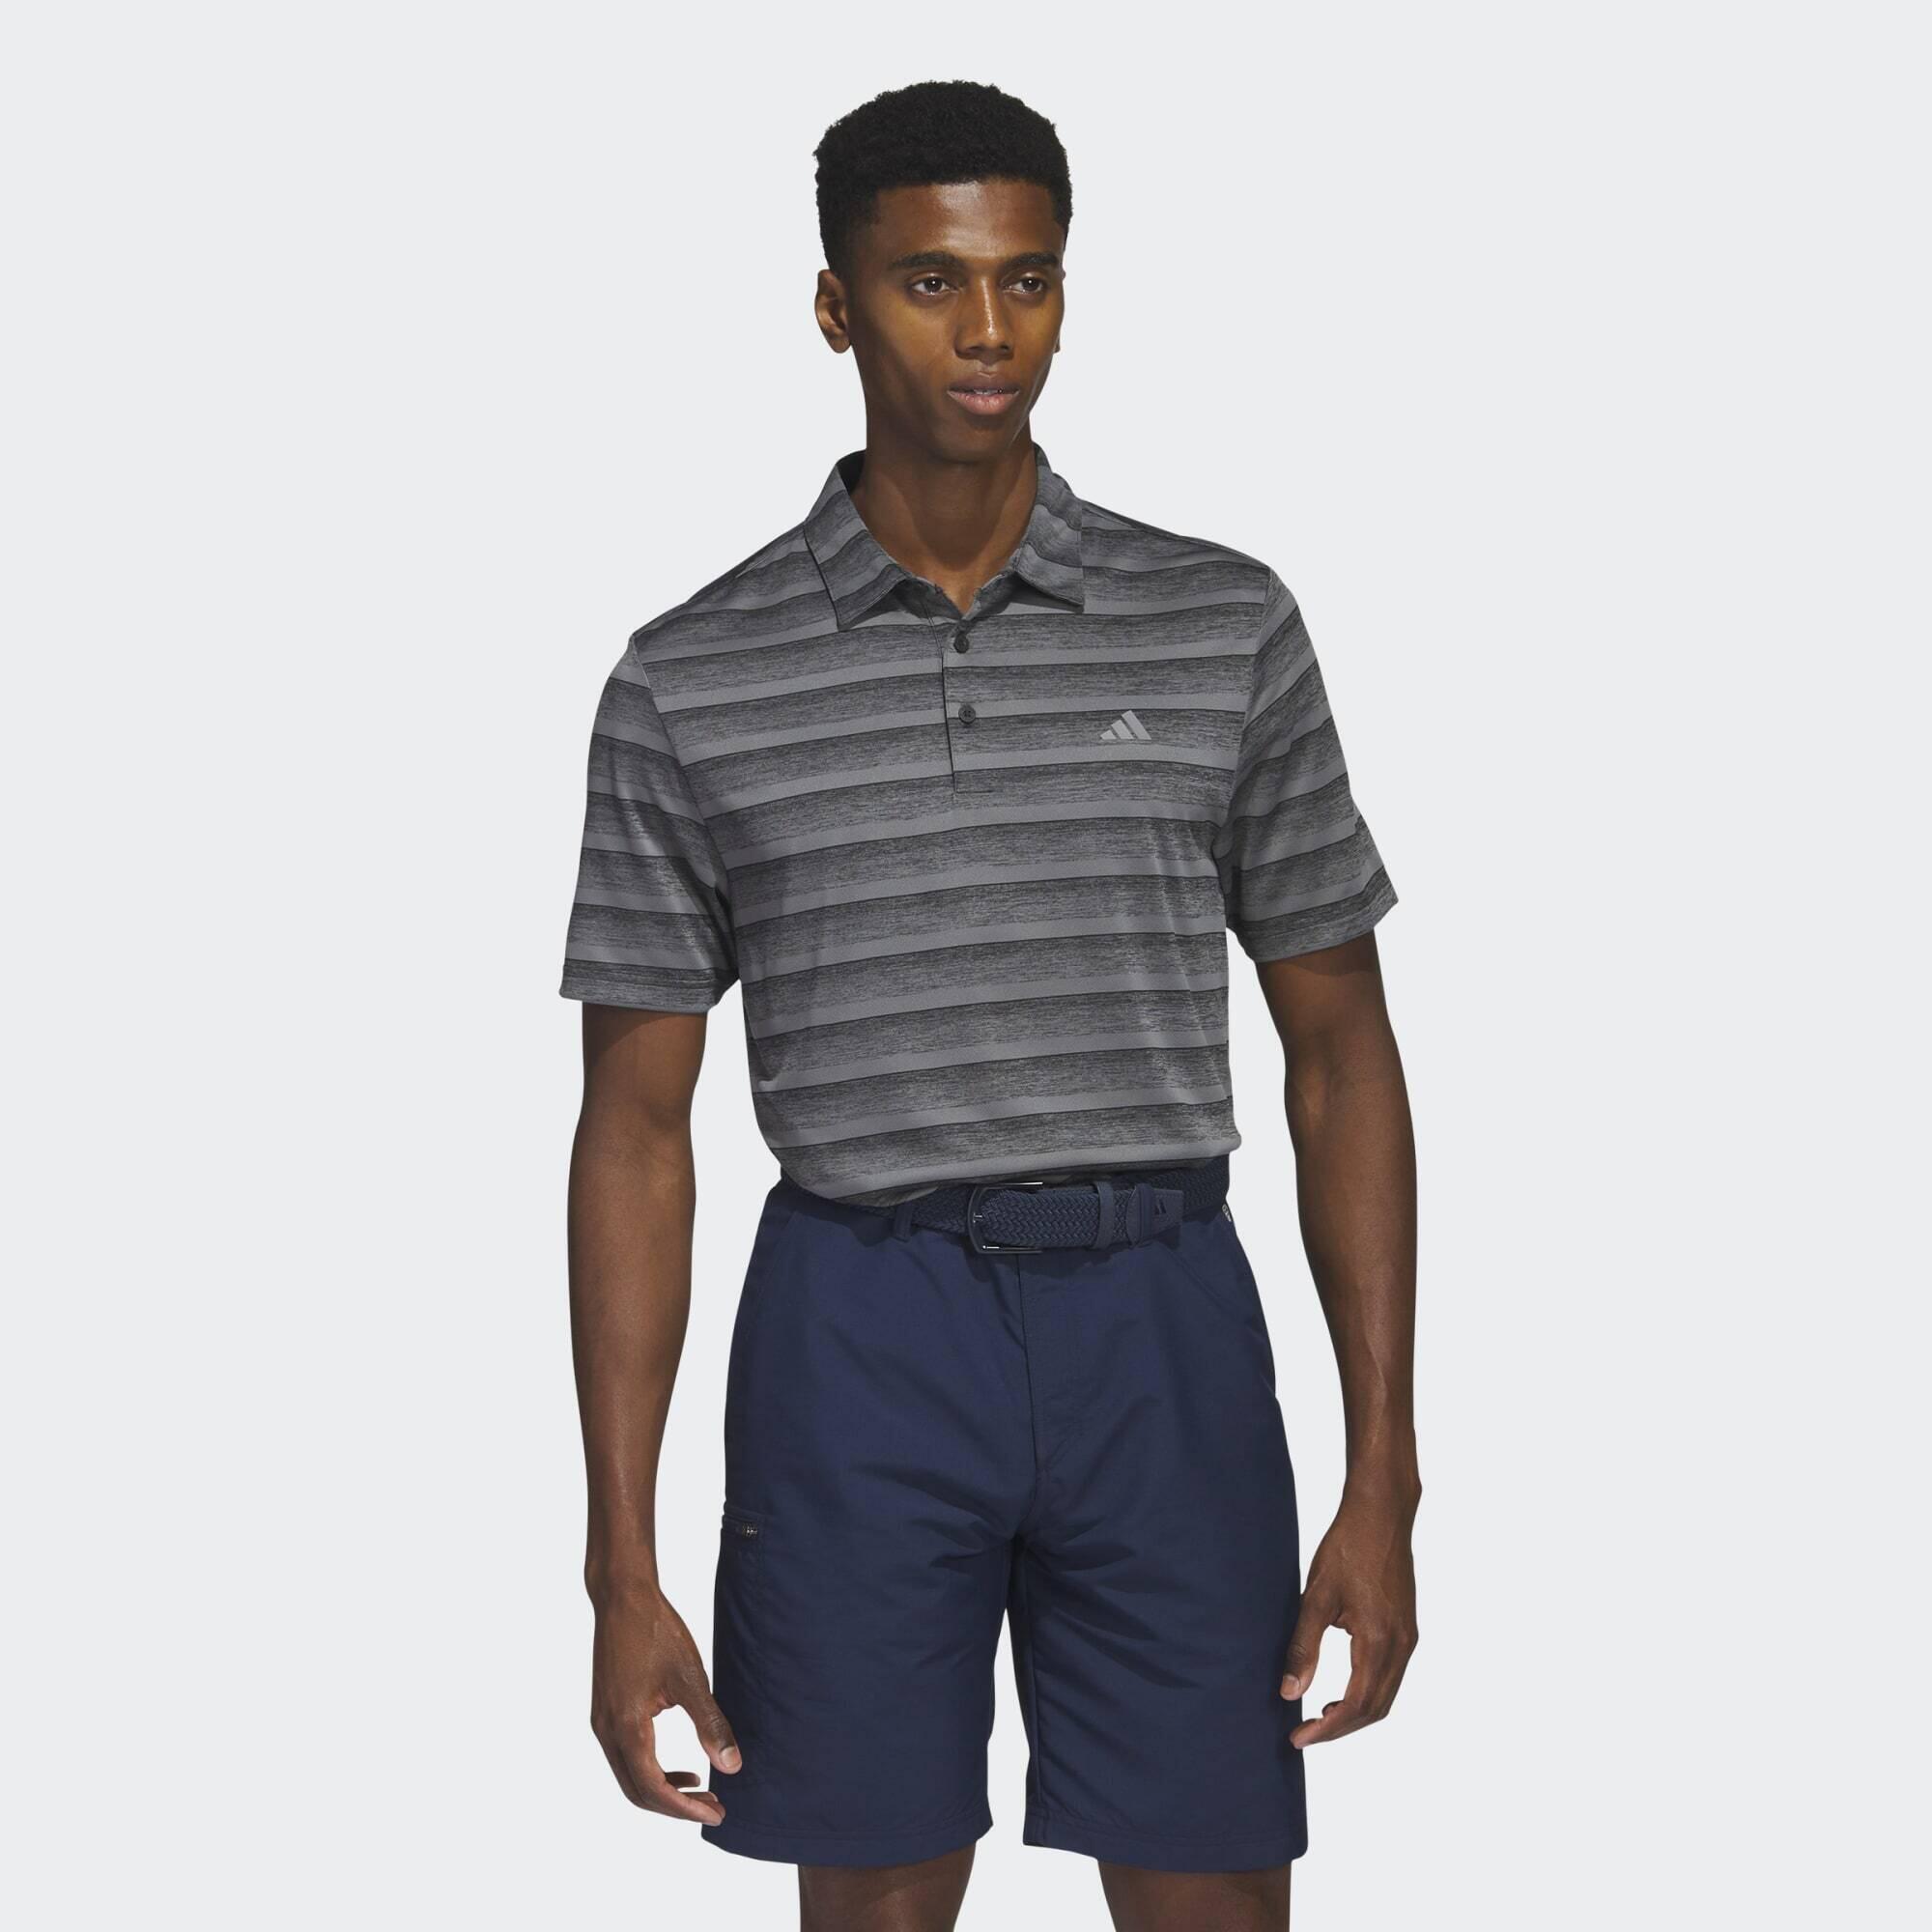 Two-Color Striped Golf Polo Shirt 1/5